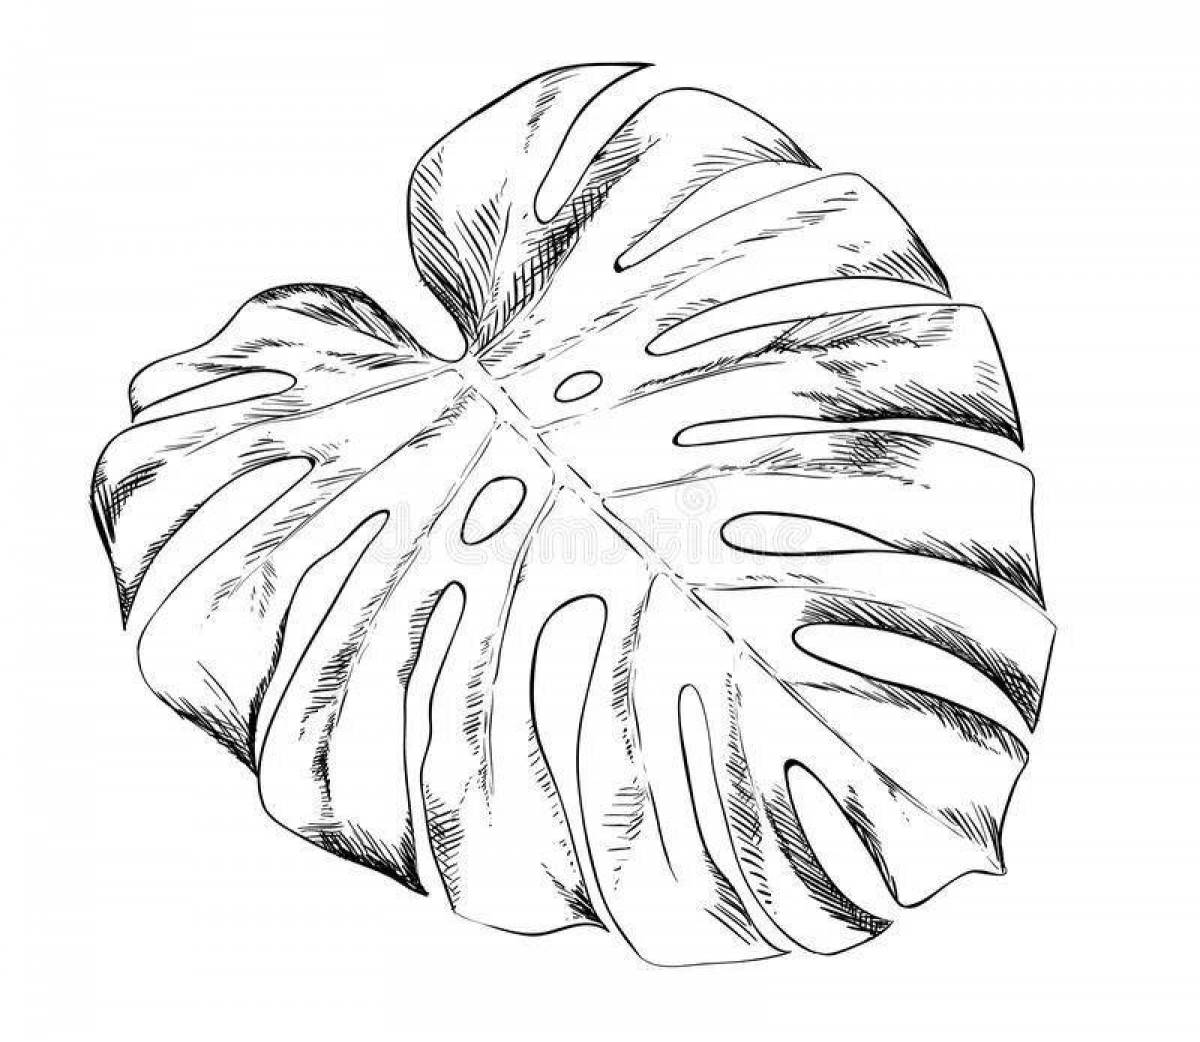 Great monstera leaf coloring page